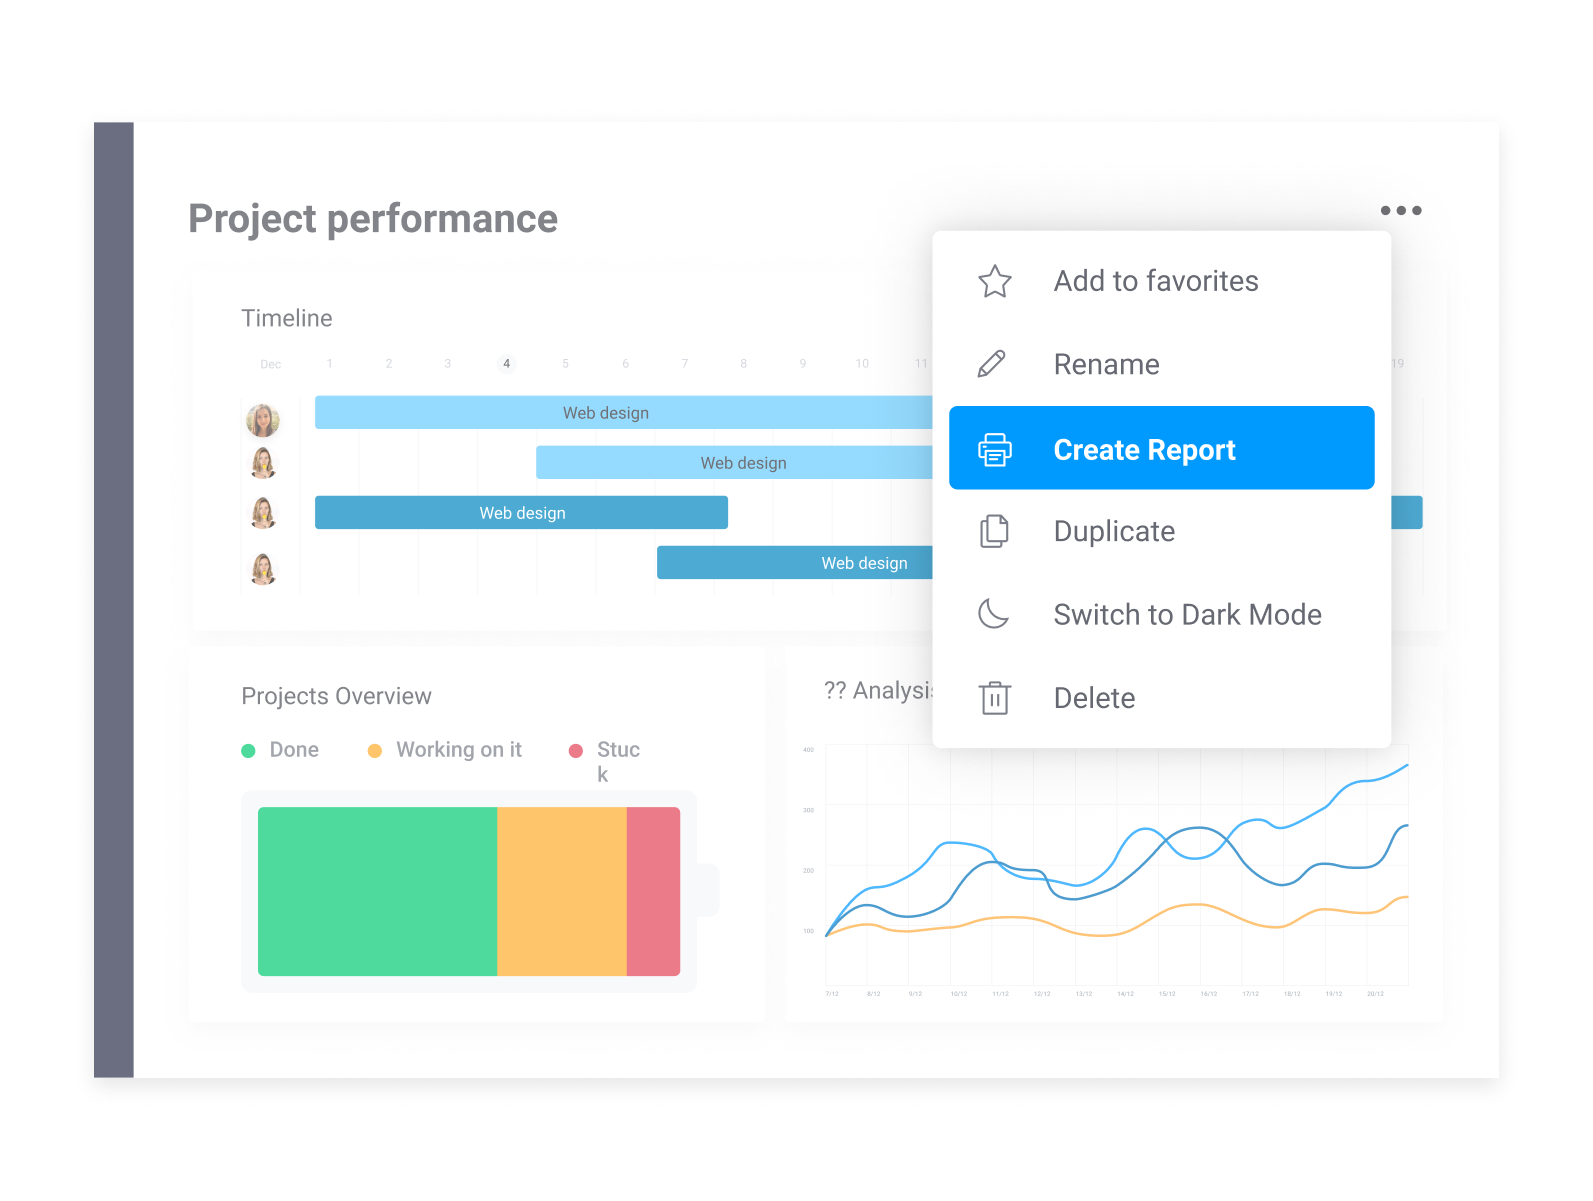 monday.com Software - A new way to manage your Projects!
Plan. Organize. Track. In one visual, collaborative space.